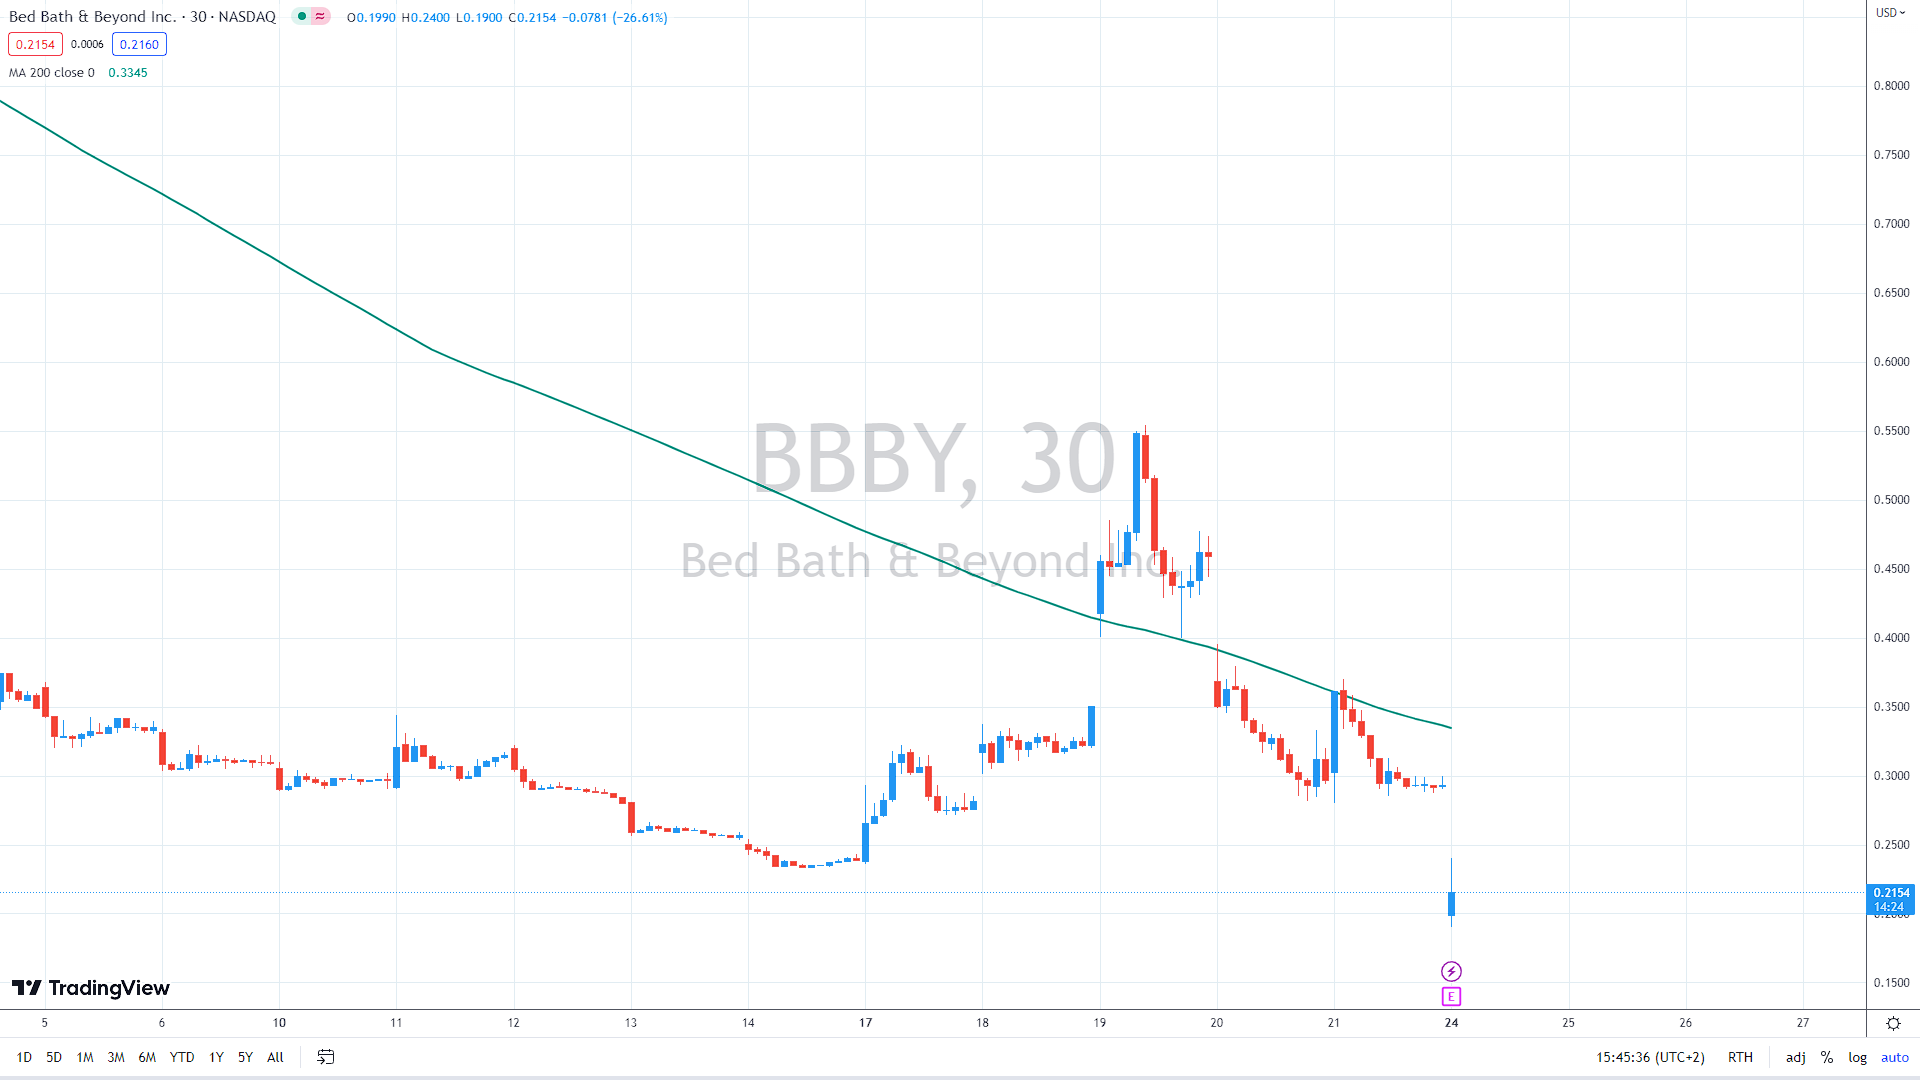 BBBY daily chart,